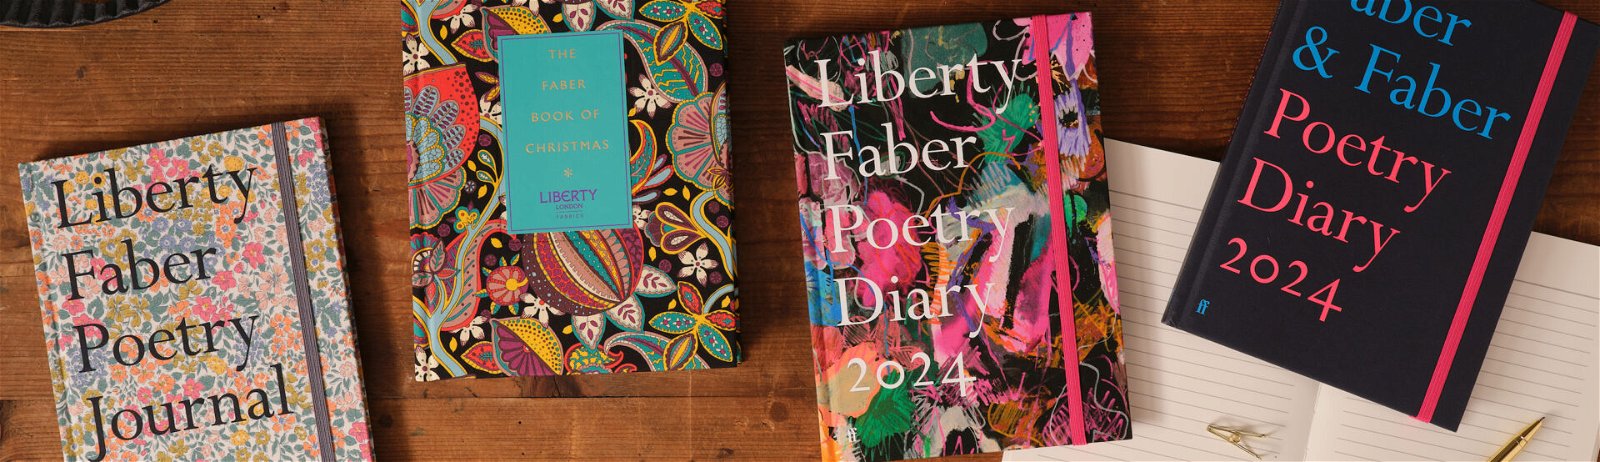 https://static.faber.co.uk/wp-content/uploads/2024/01/Faber-Poetry-Diaries-letterbox-1920x554.jpg